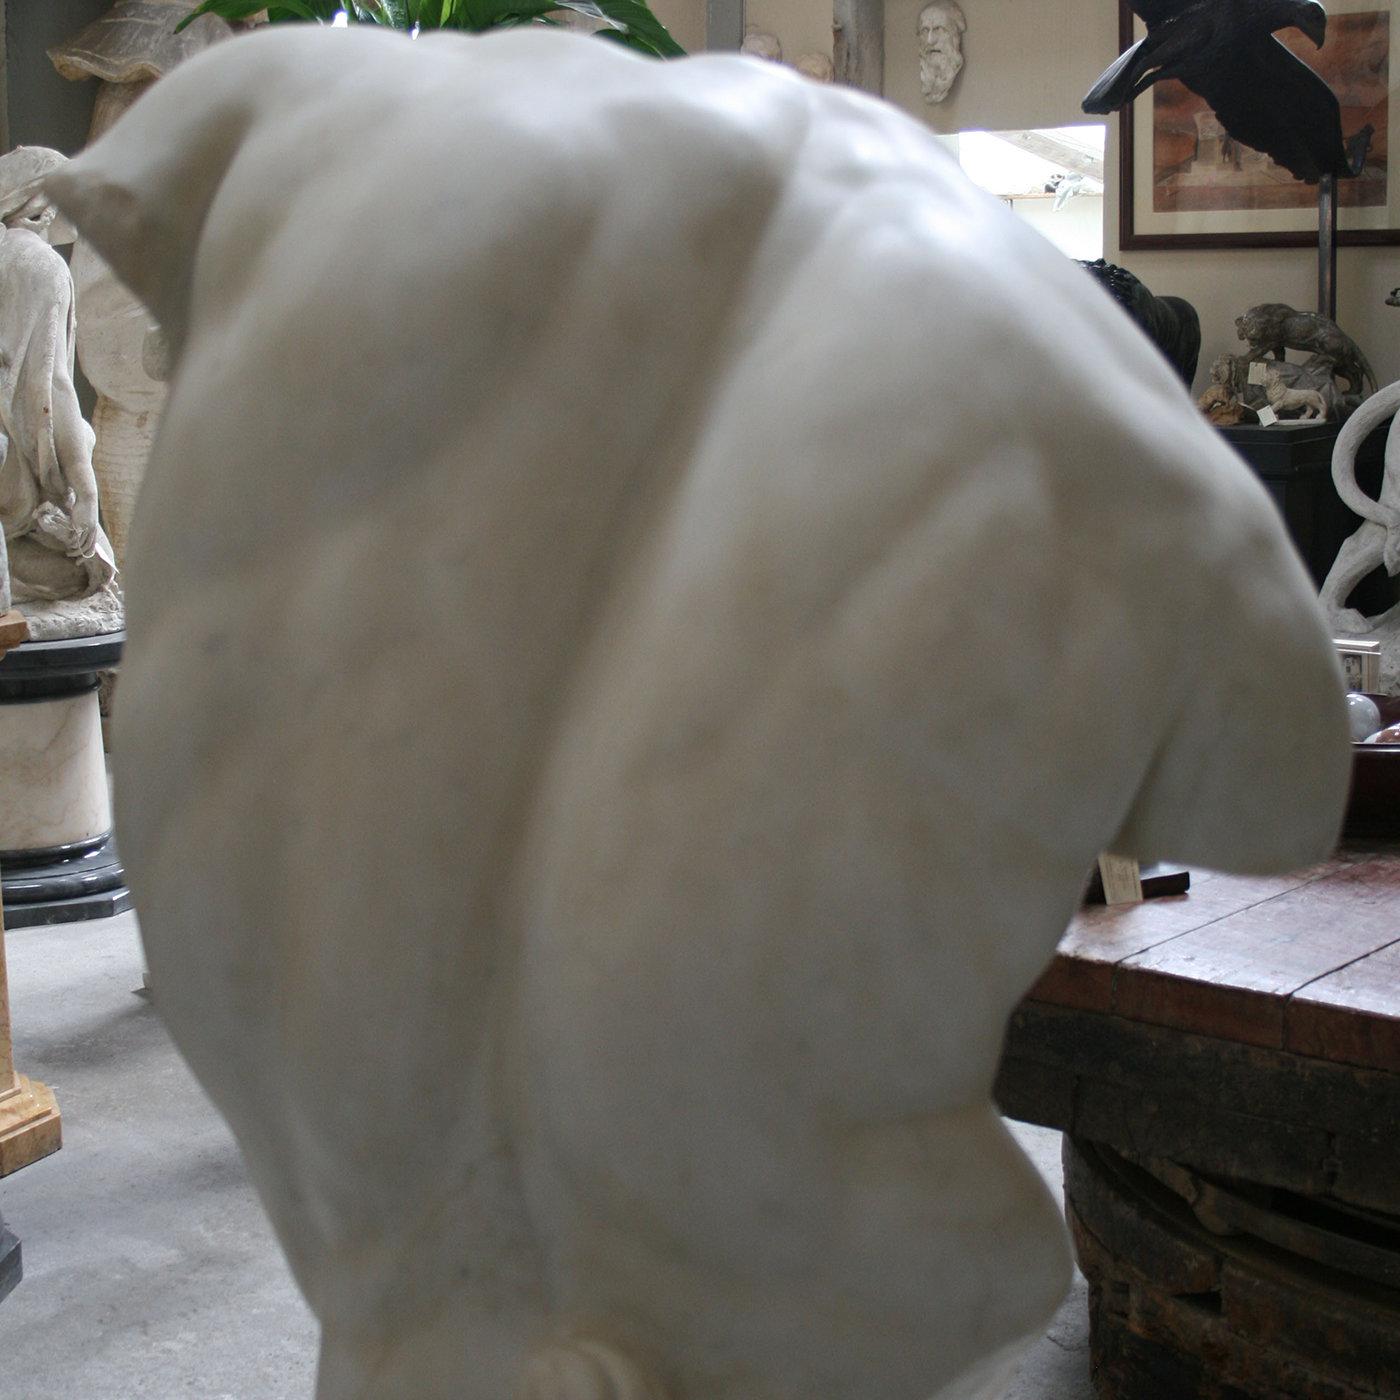 A sculpture in precious white Carrara marble reproducing the Torso Gaddi, the famous fragmentary sculpture displayed in the Uffizi Museums in Florence, which inspired many great artists of the Renaissance, including Michelangelo. Just like in the